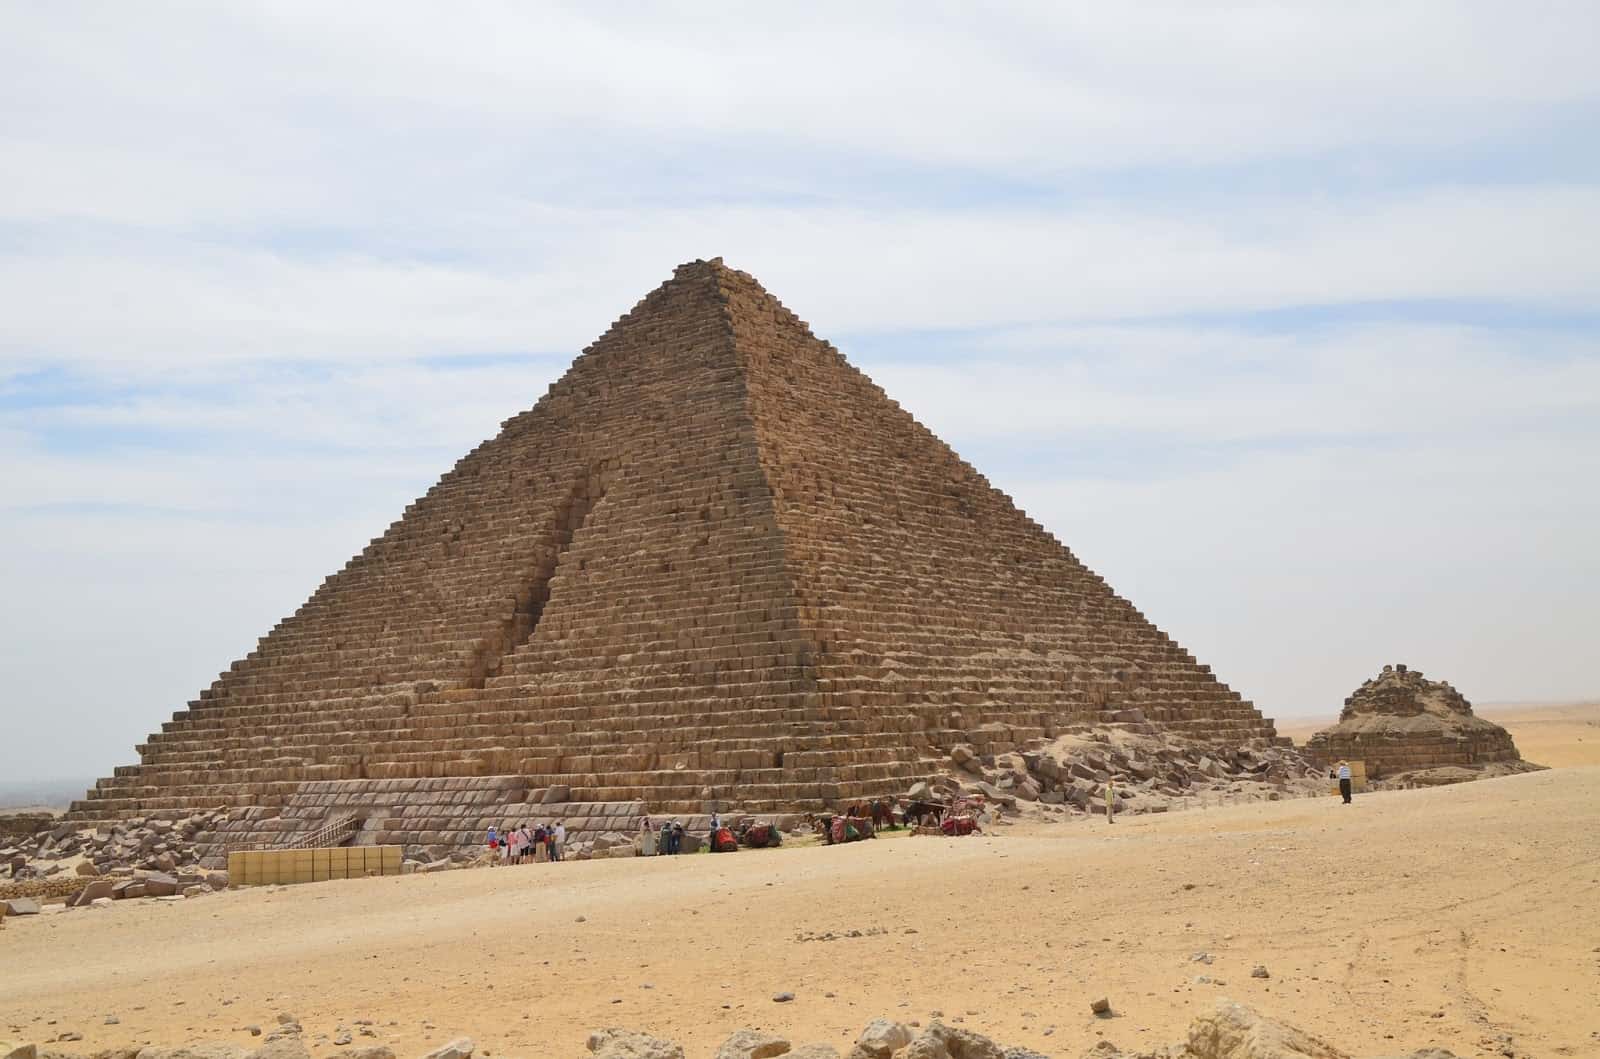 Pyramid of Menkaure at the Pyramids of Giza in Egypt